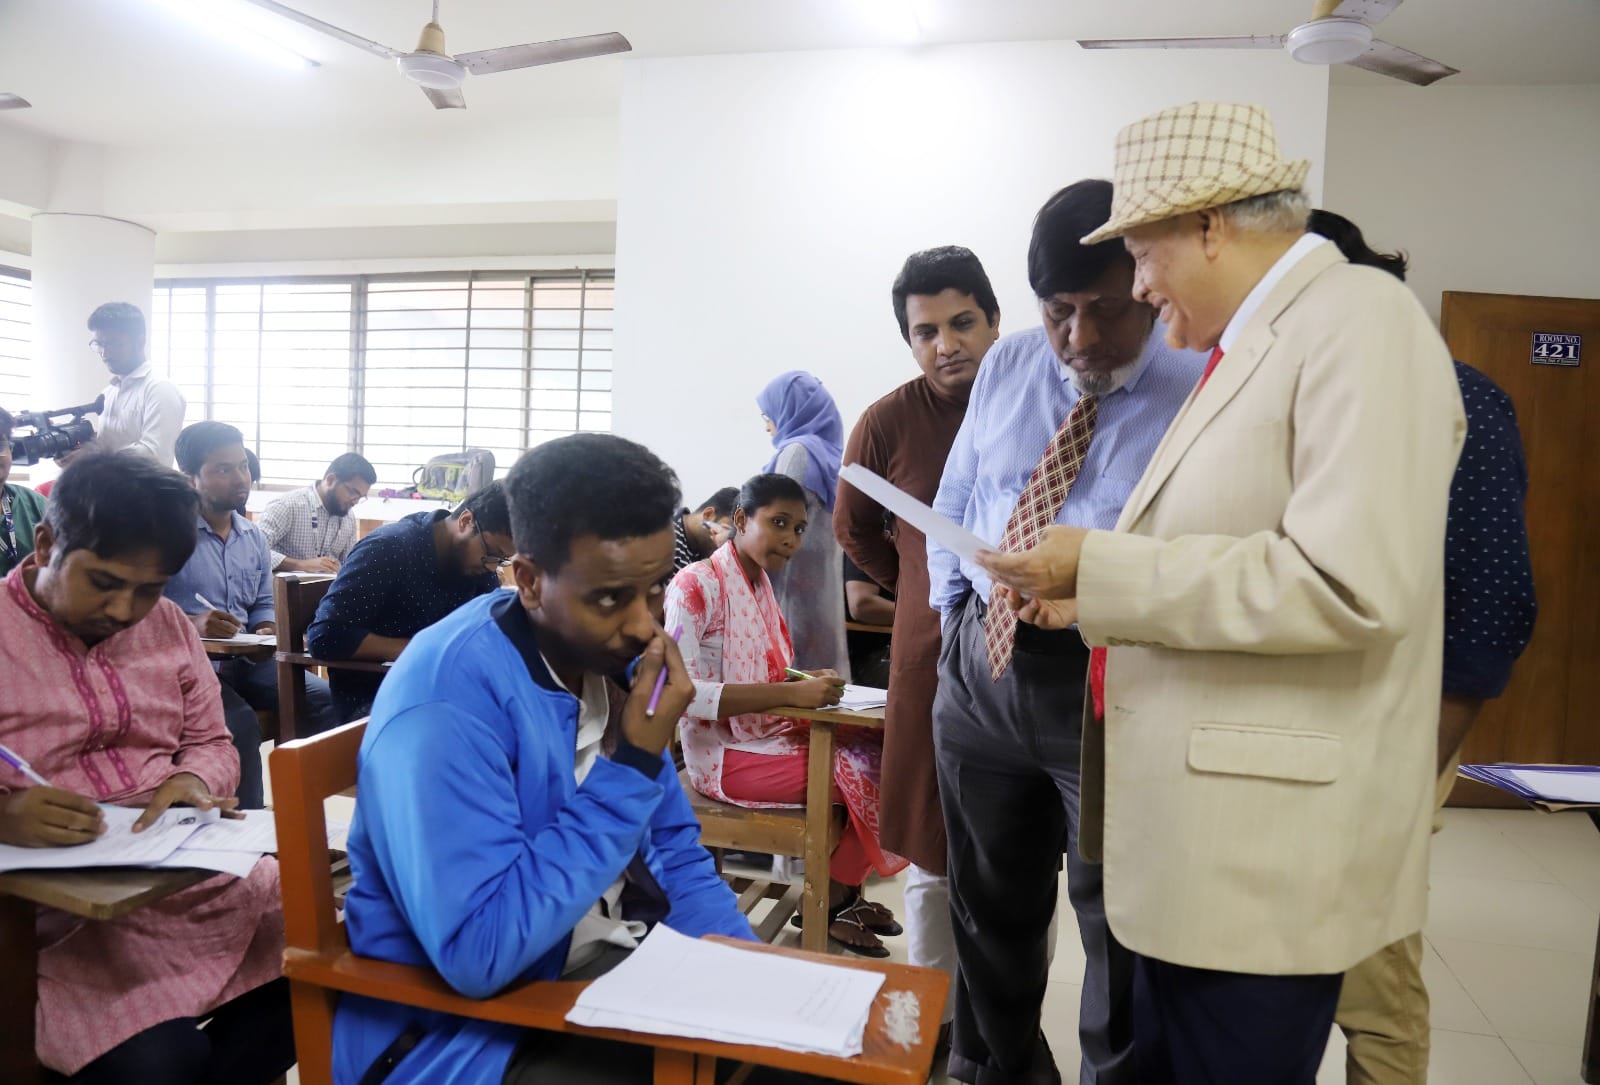 The Honorable Founder of Asian University of Bangladesh, Prof. Dr. Abul Hasan M. Sadeq,  visited the Examination Halls today